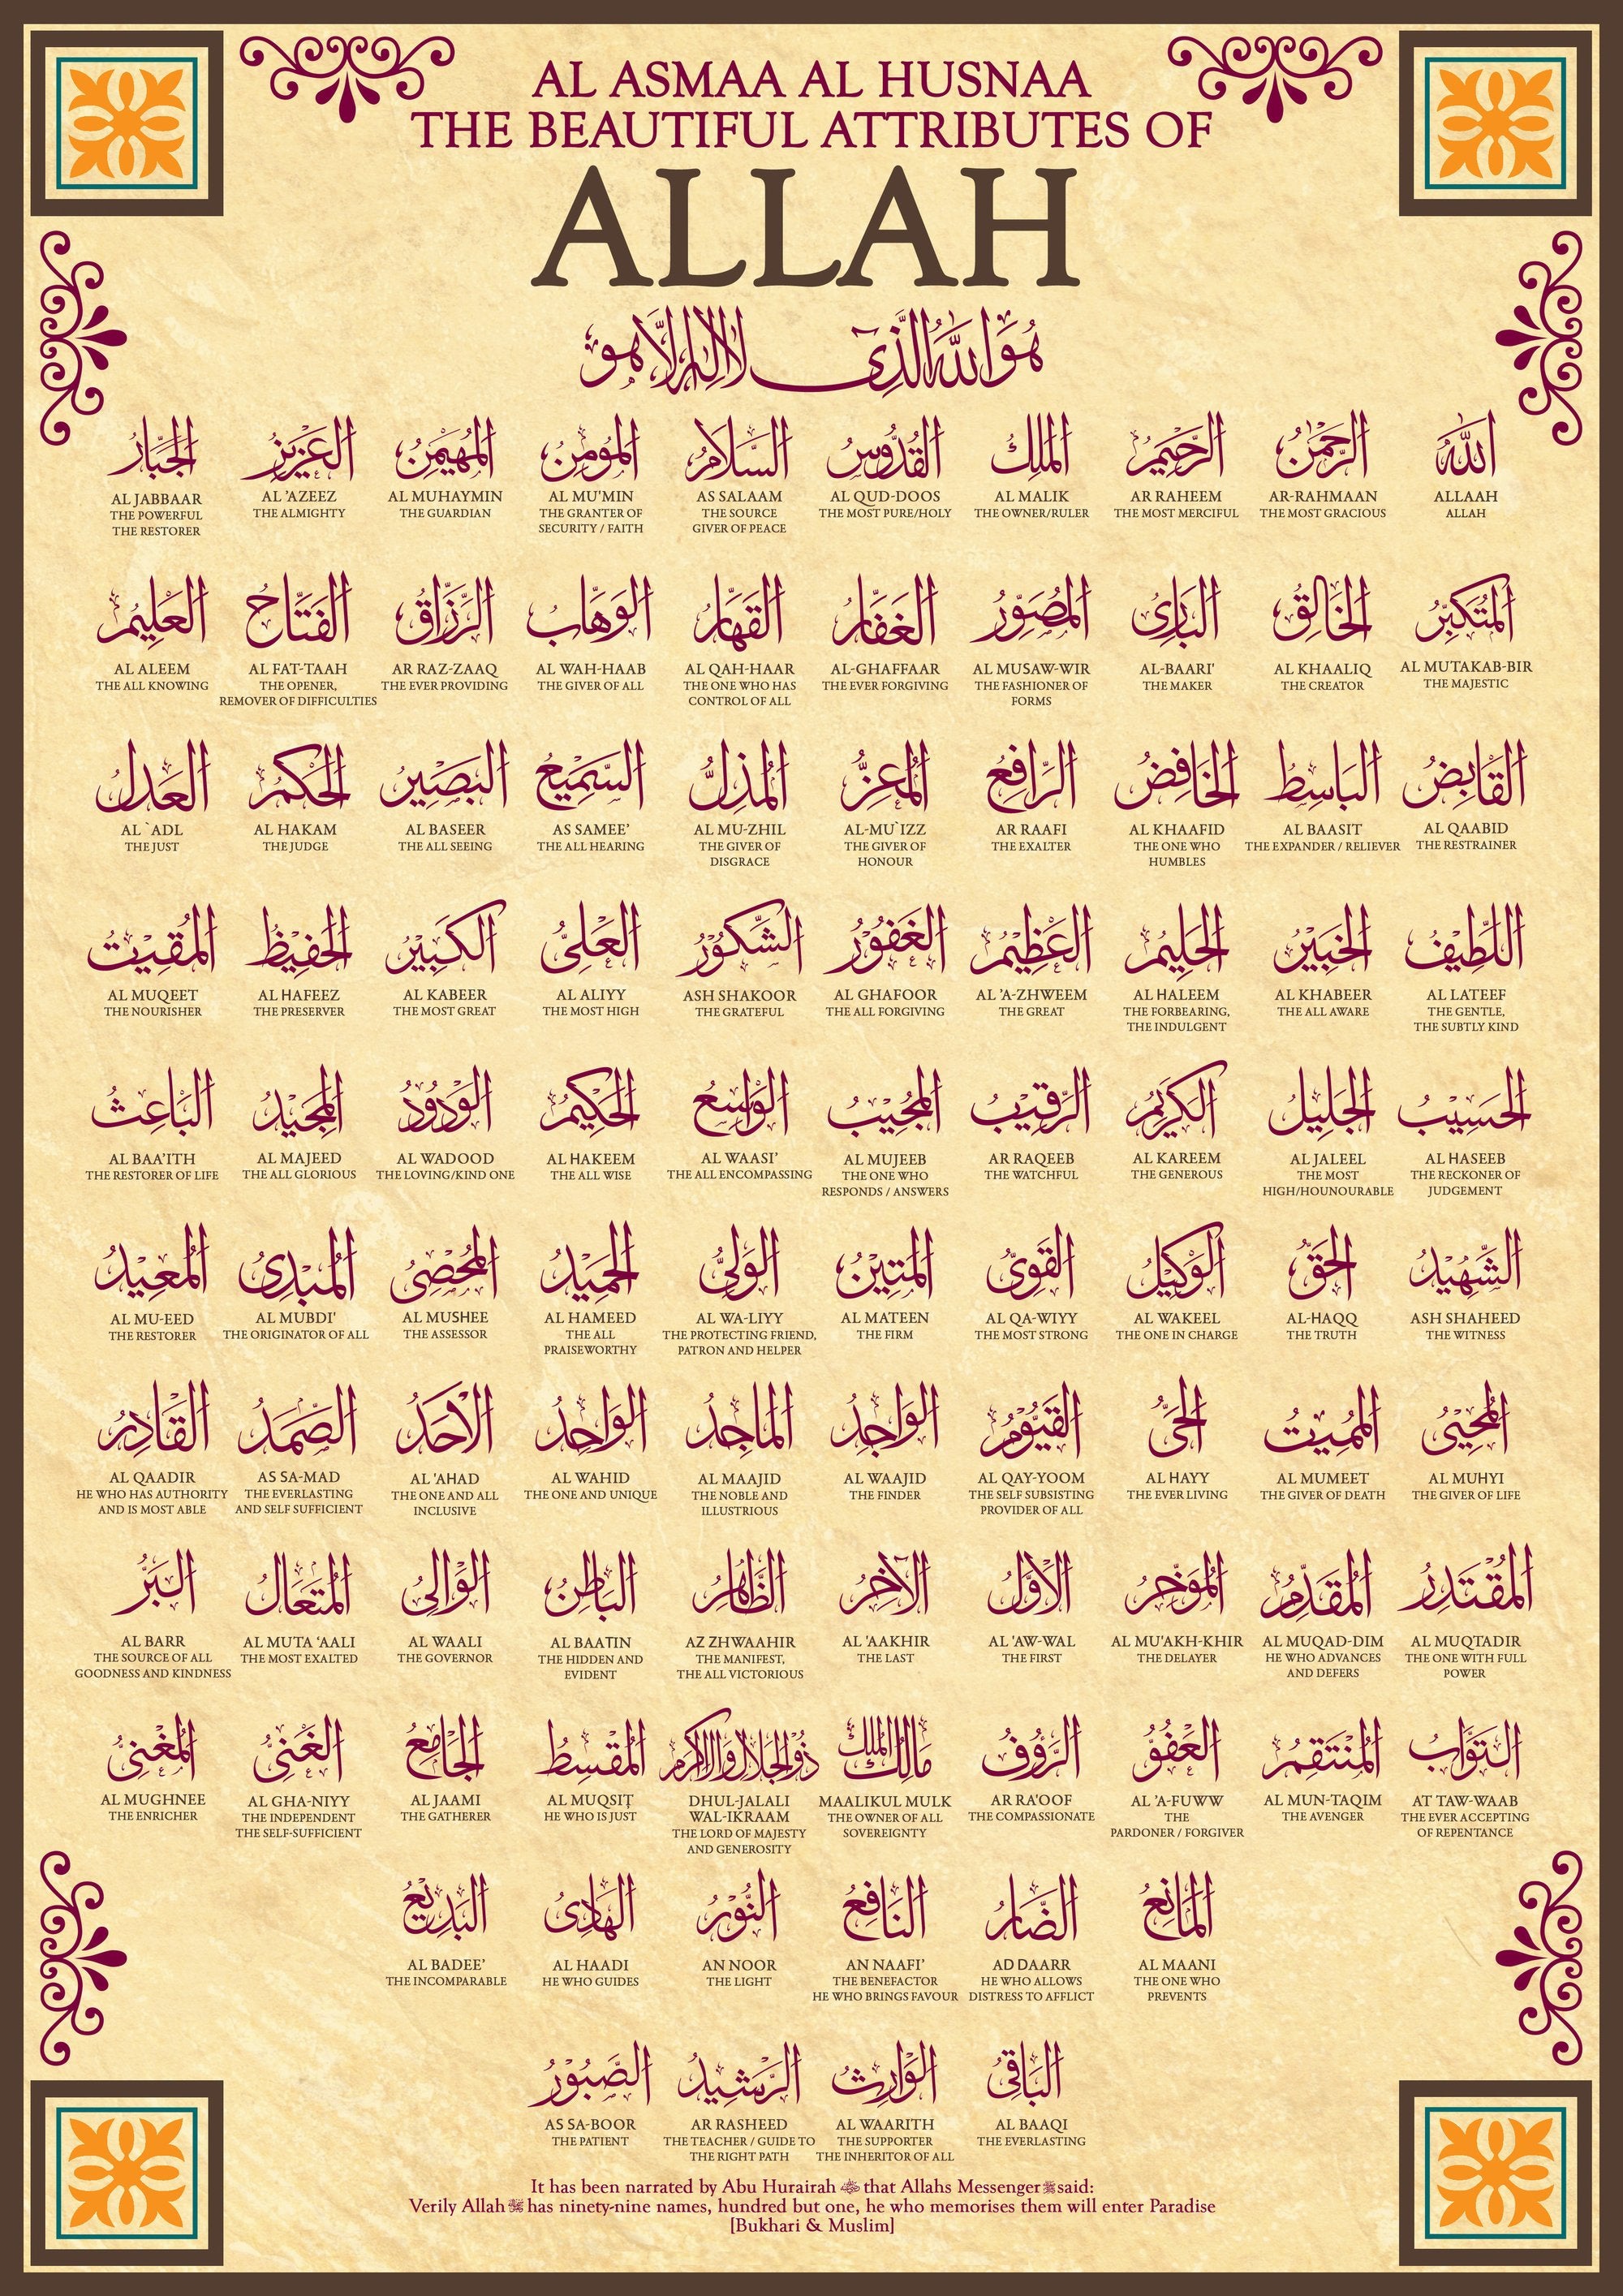 Is Allah part of 99 names?